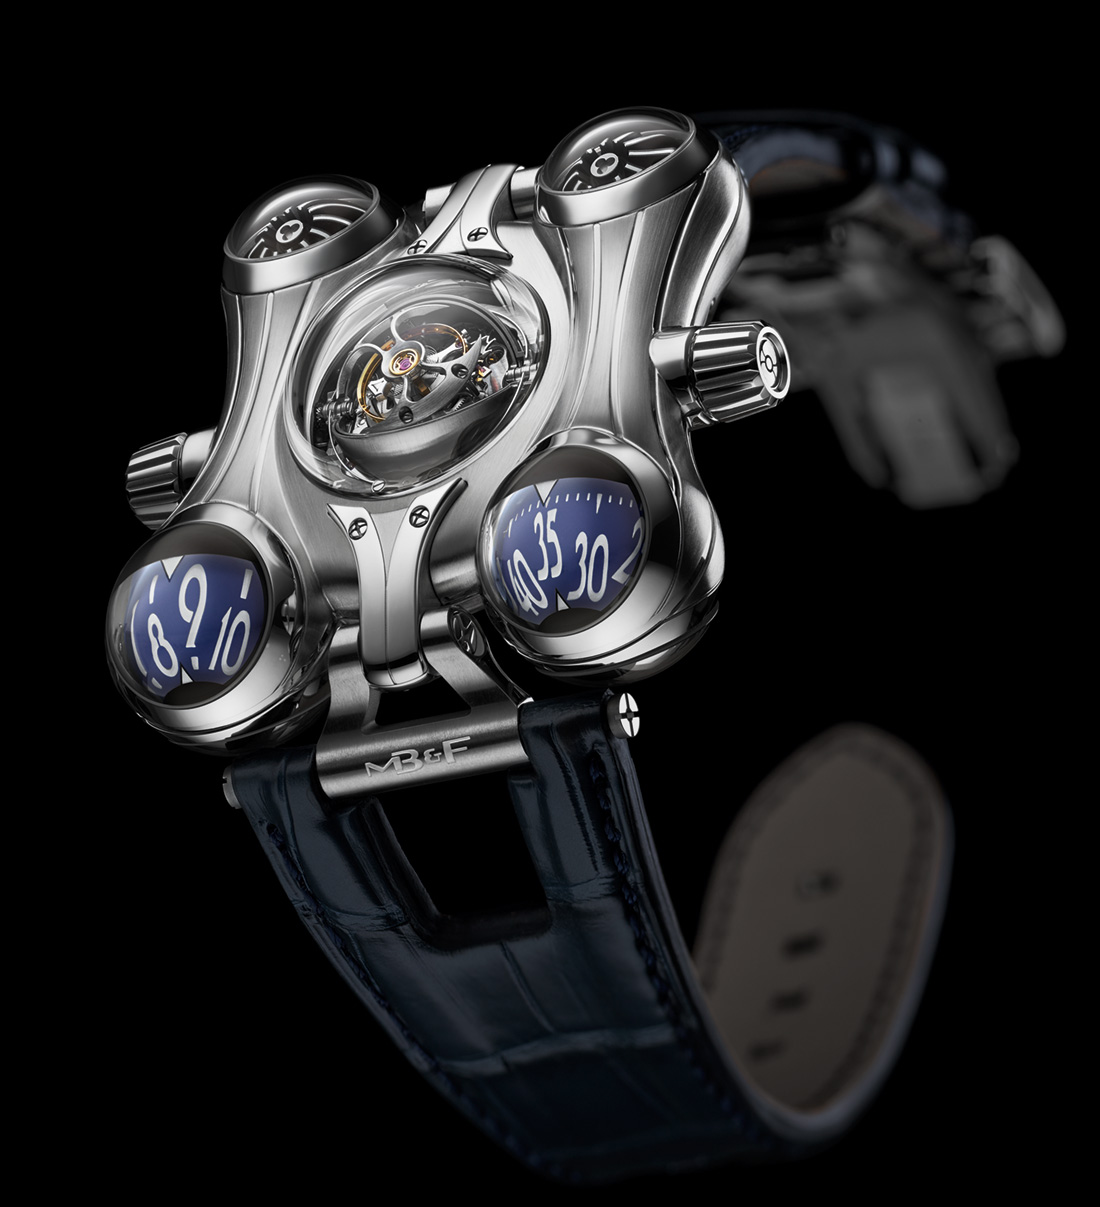 MB&F HM6 Final Edition watch